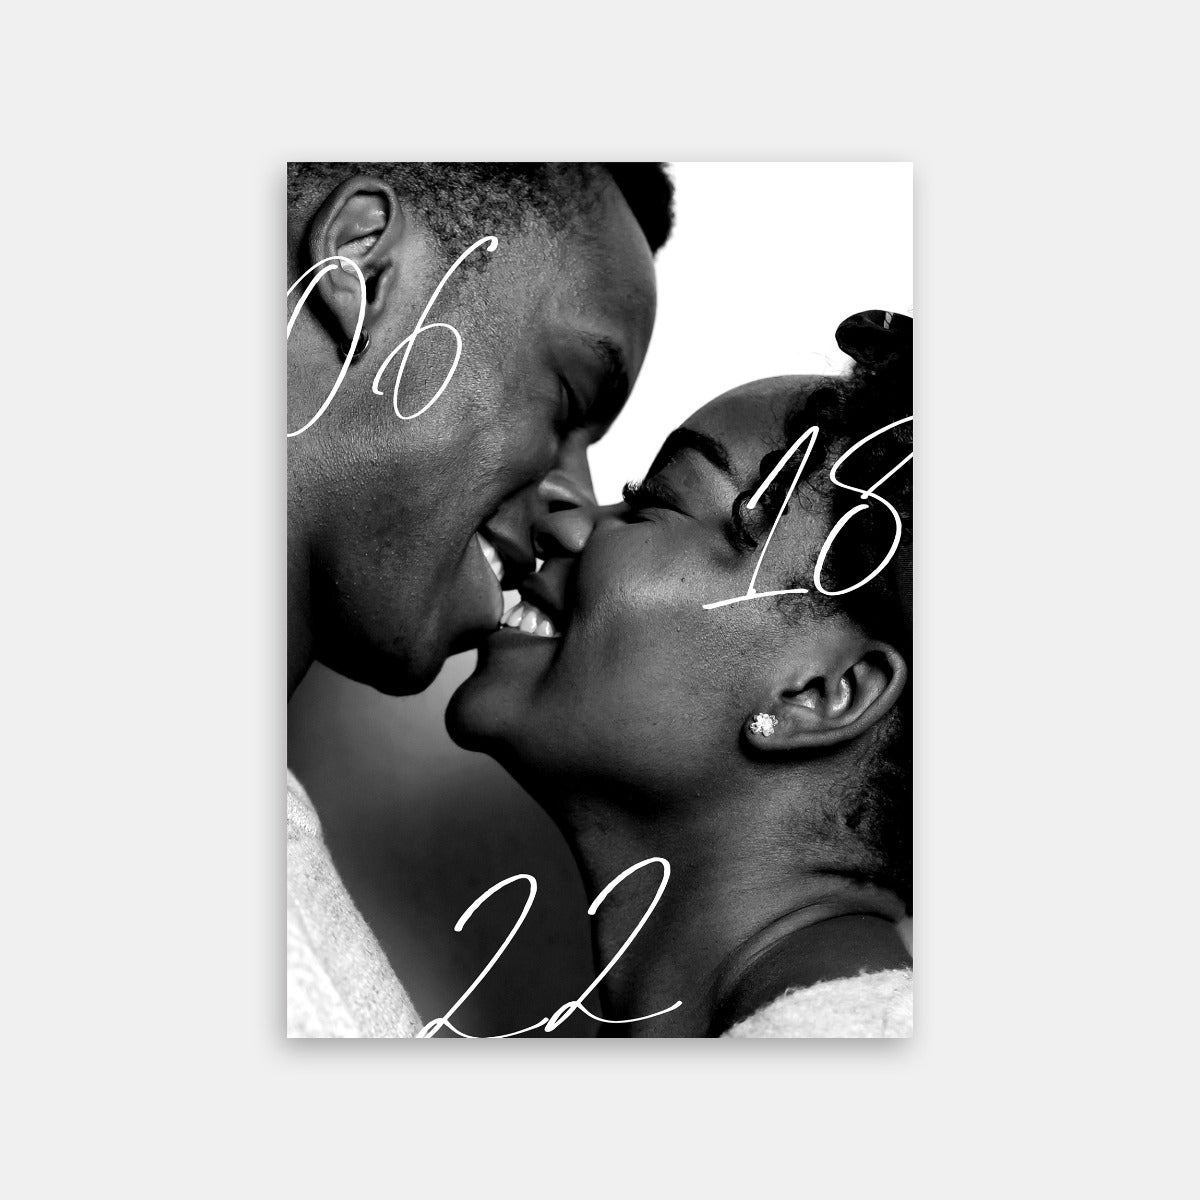 Sweet and Simple Save the Date